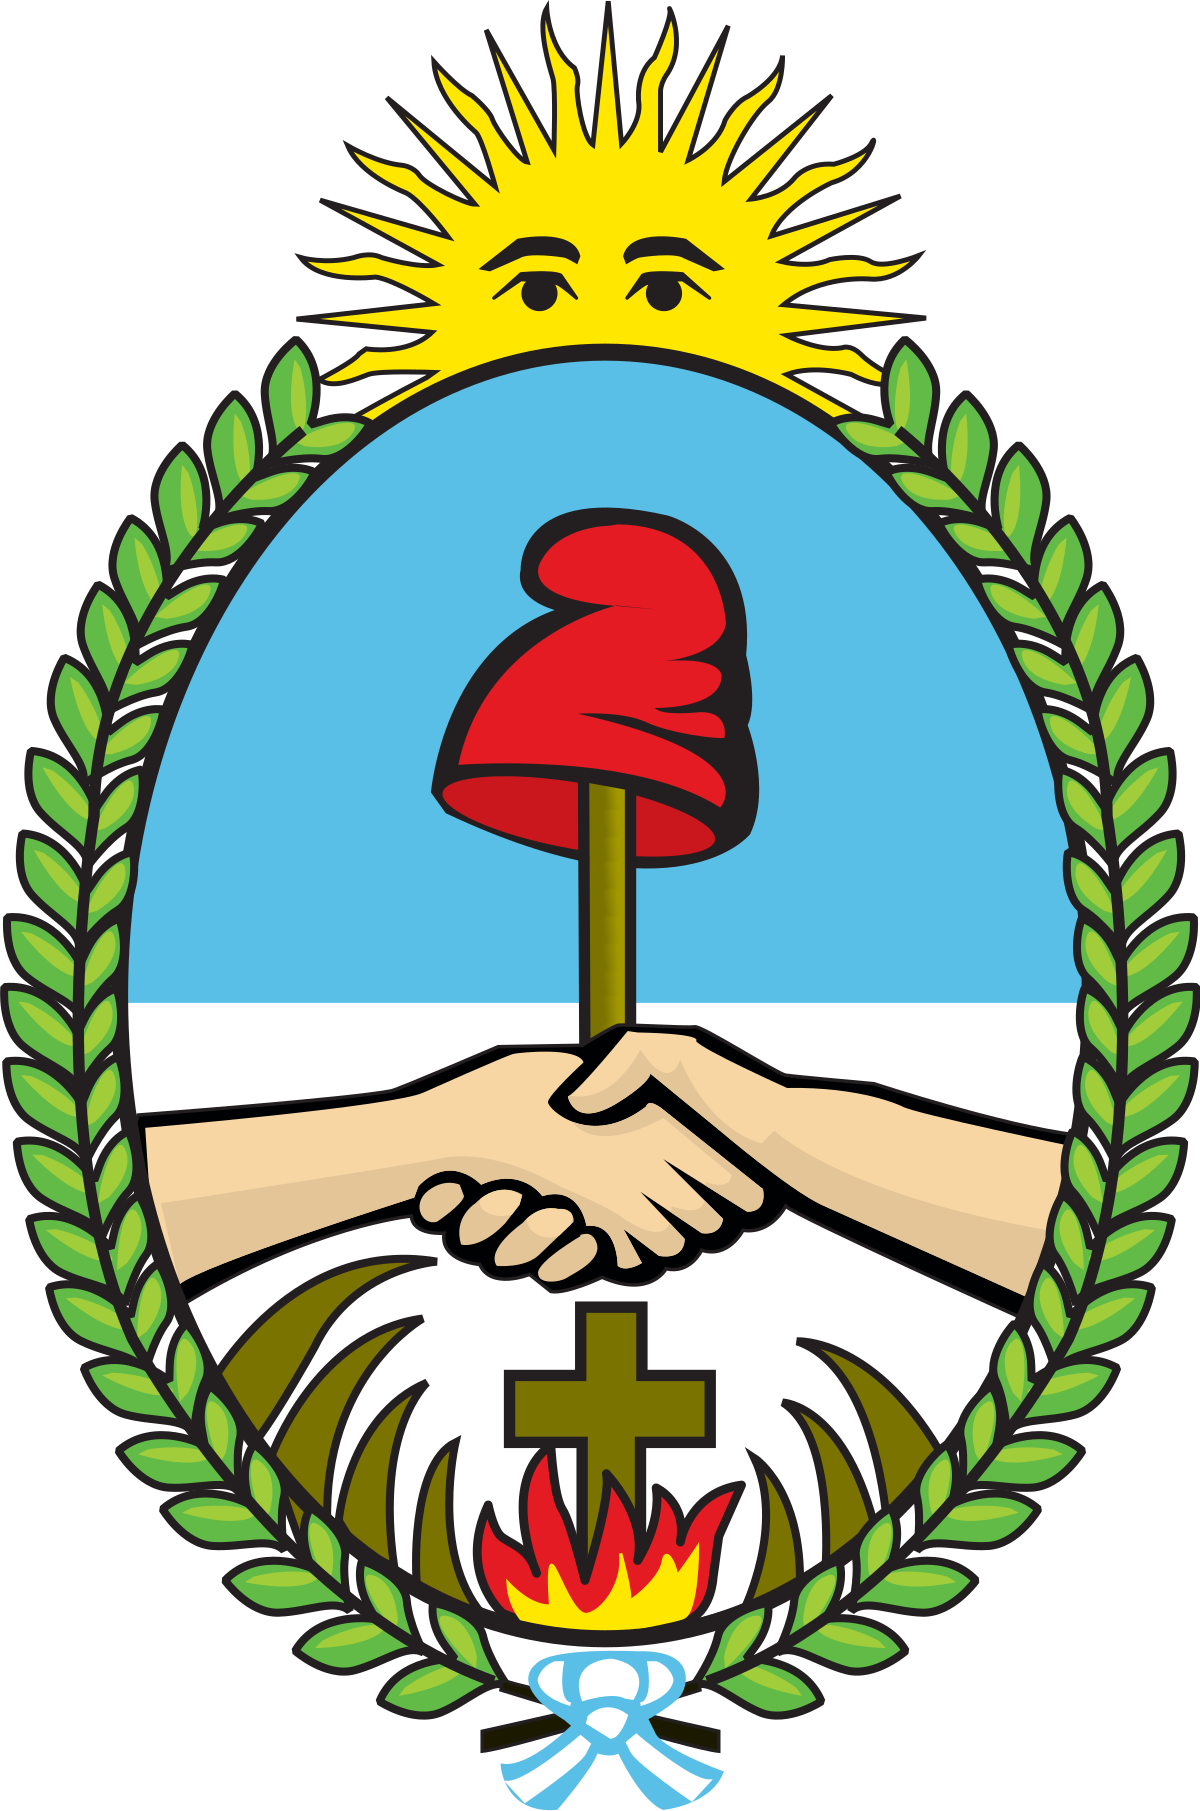 State seal of Corrientes Province